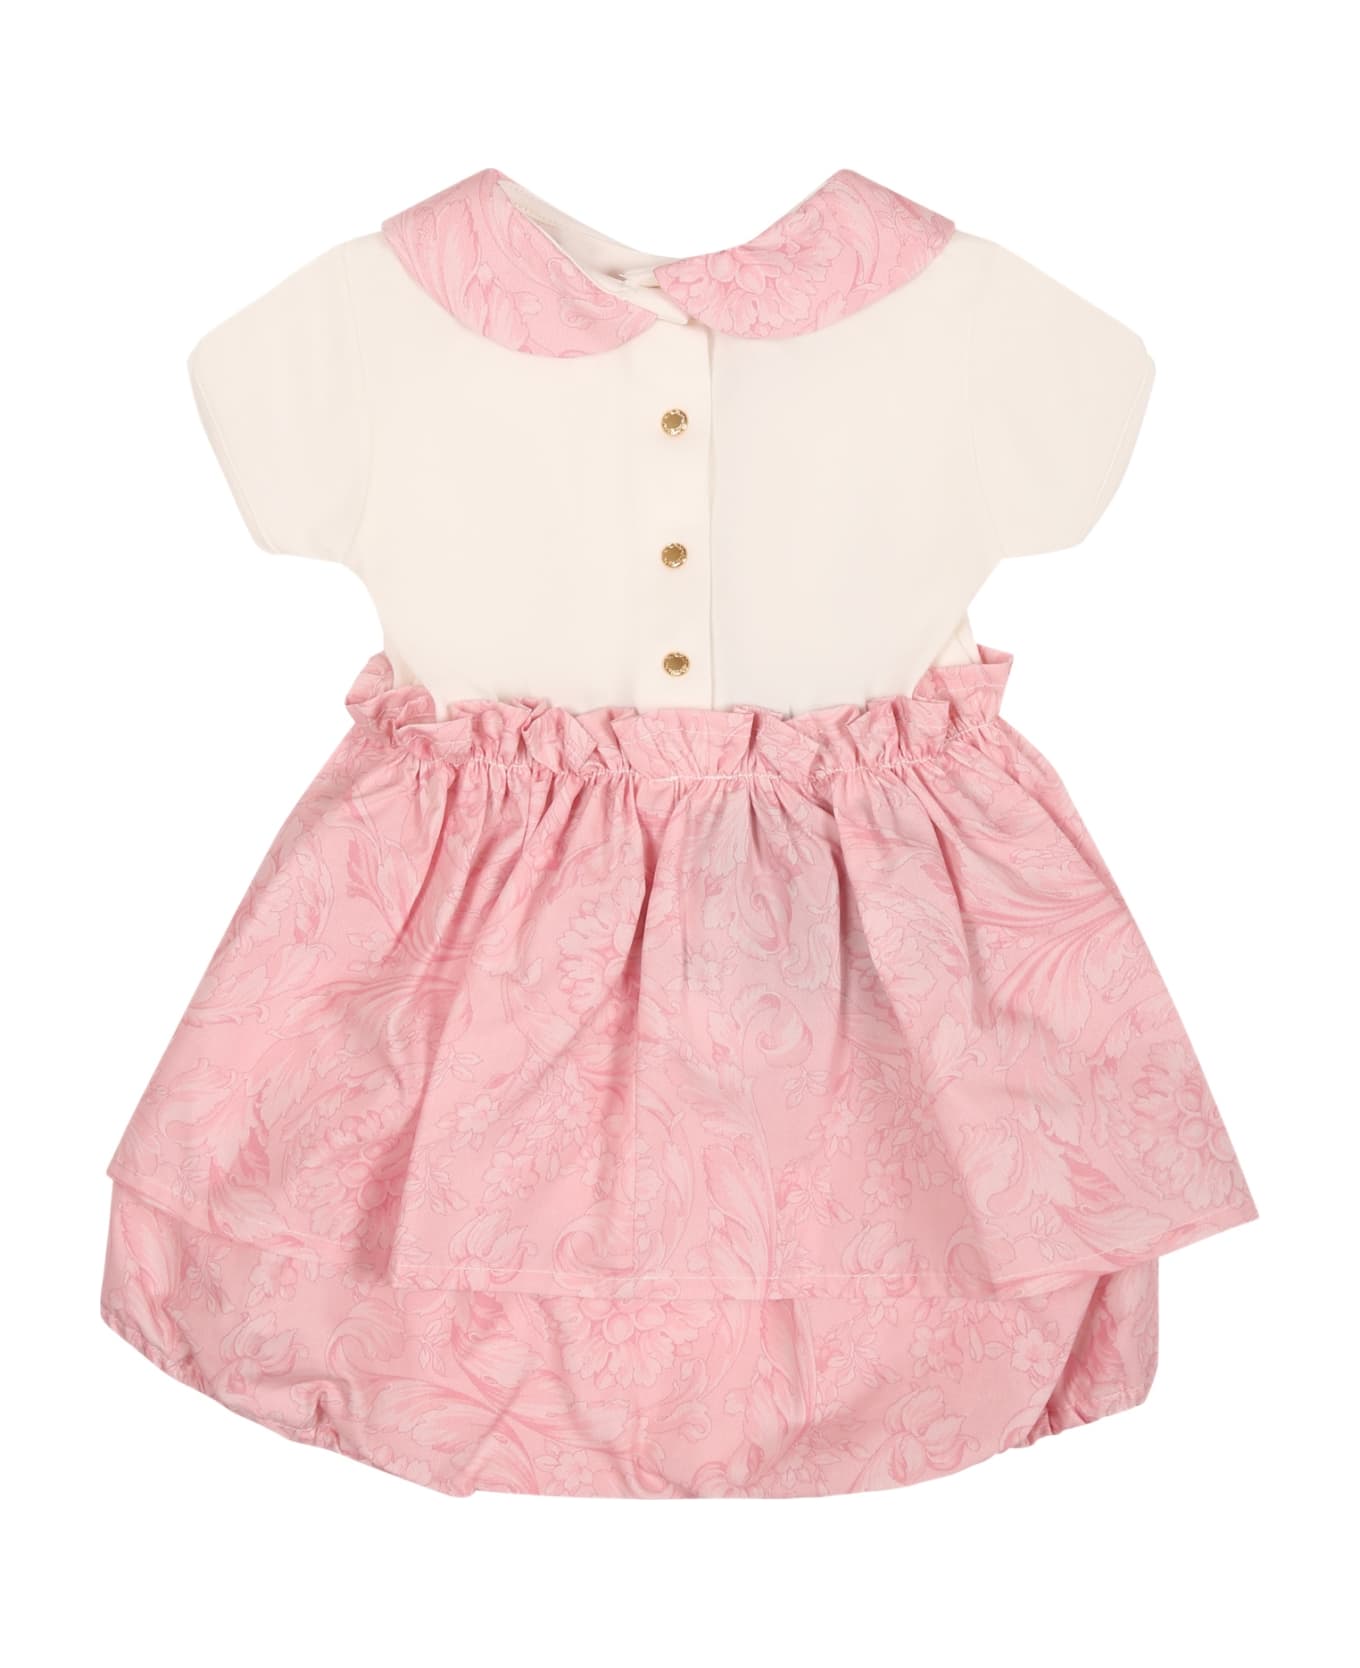 Versace Pink Dress For Baby Girl With Baroque Print - Pink